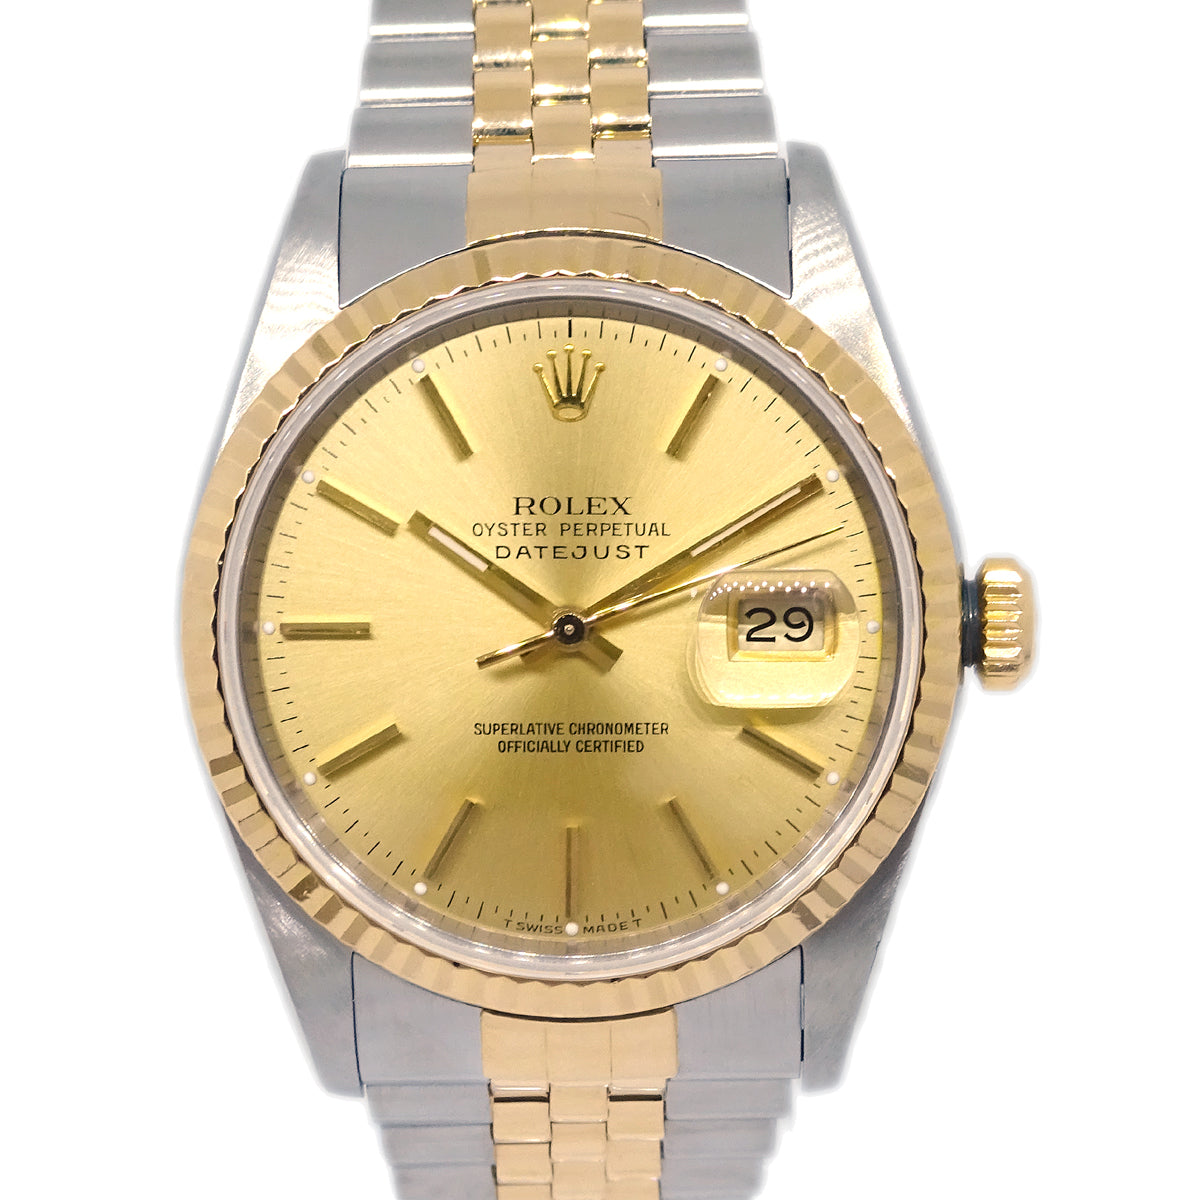 Rolex Oyster Perpetual Datejust 36mm Ref.16233 Watch 18KYG SS